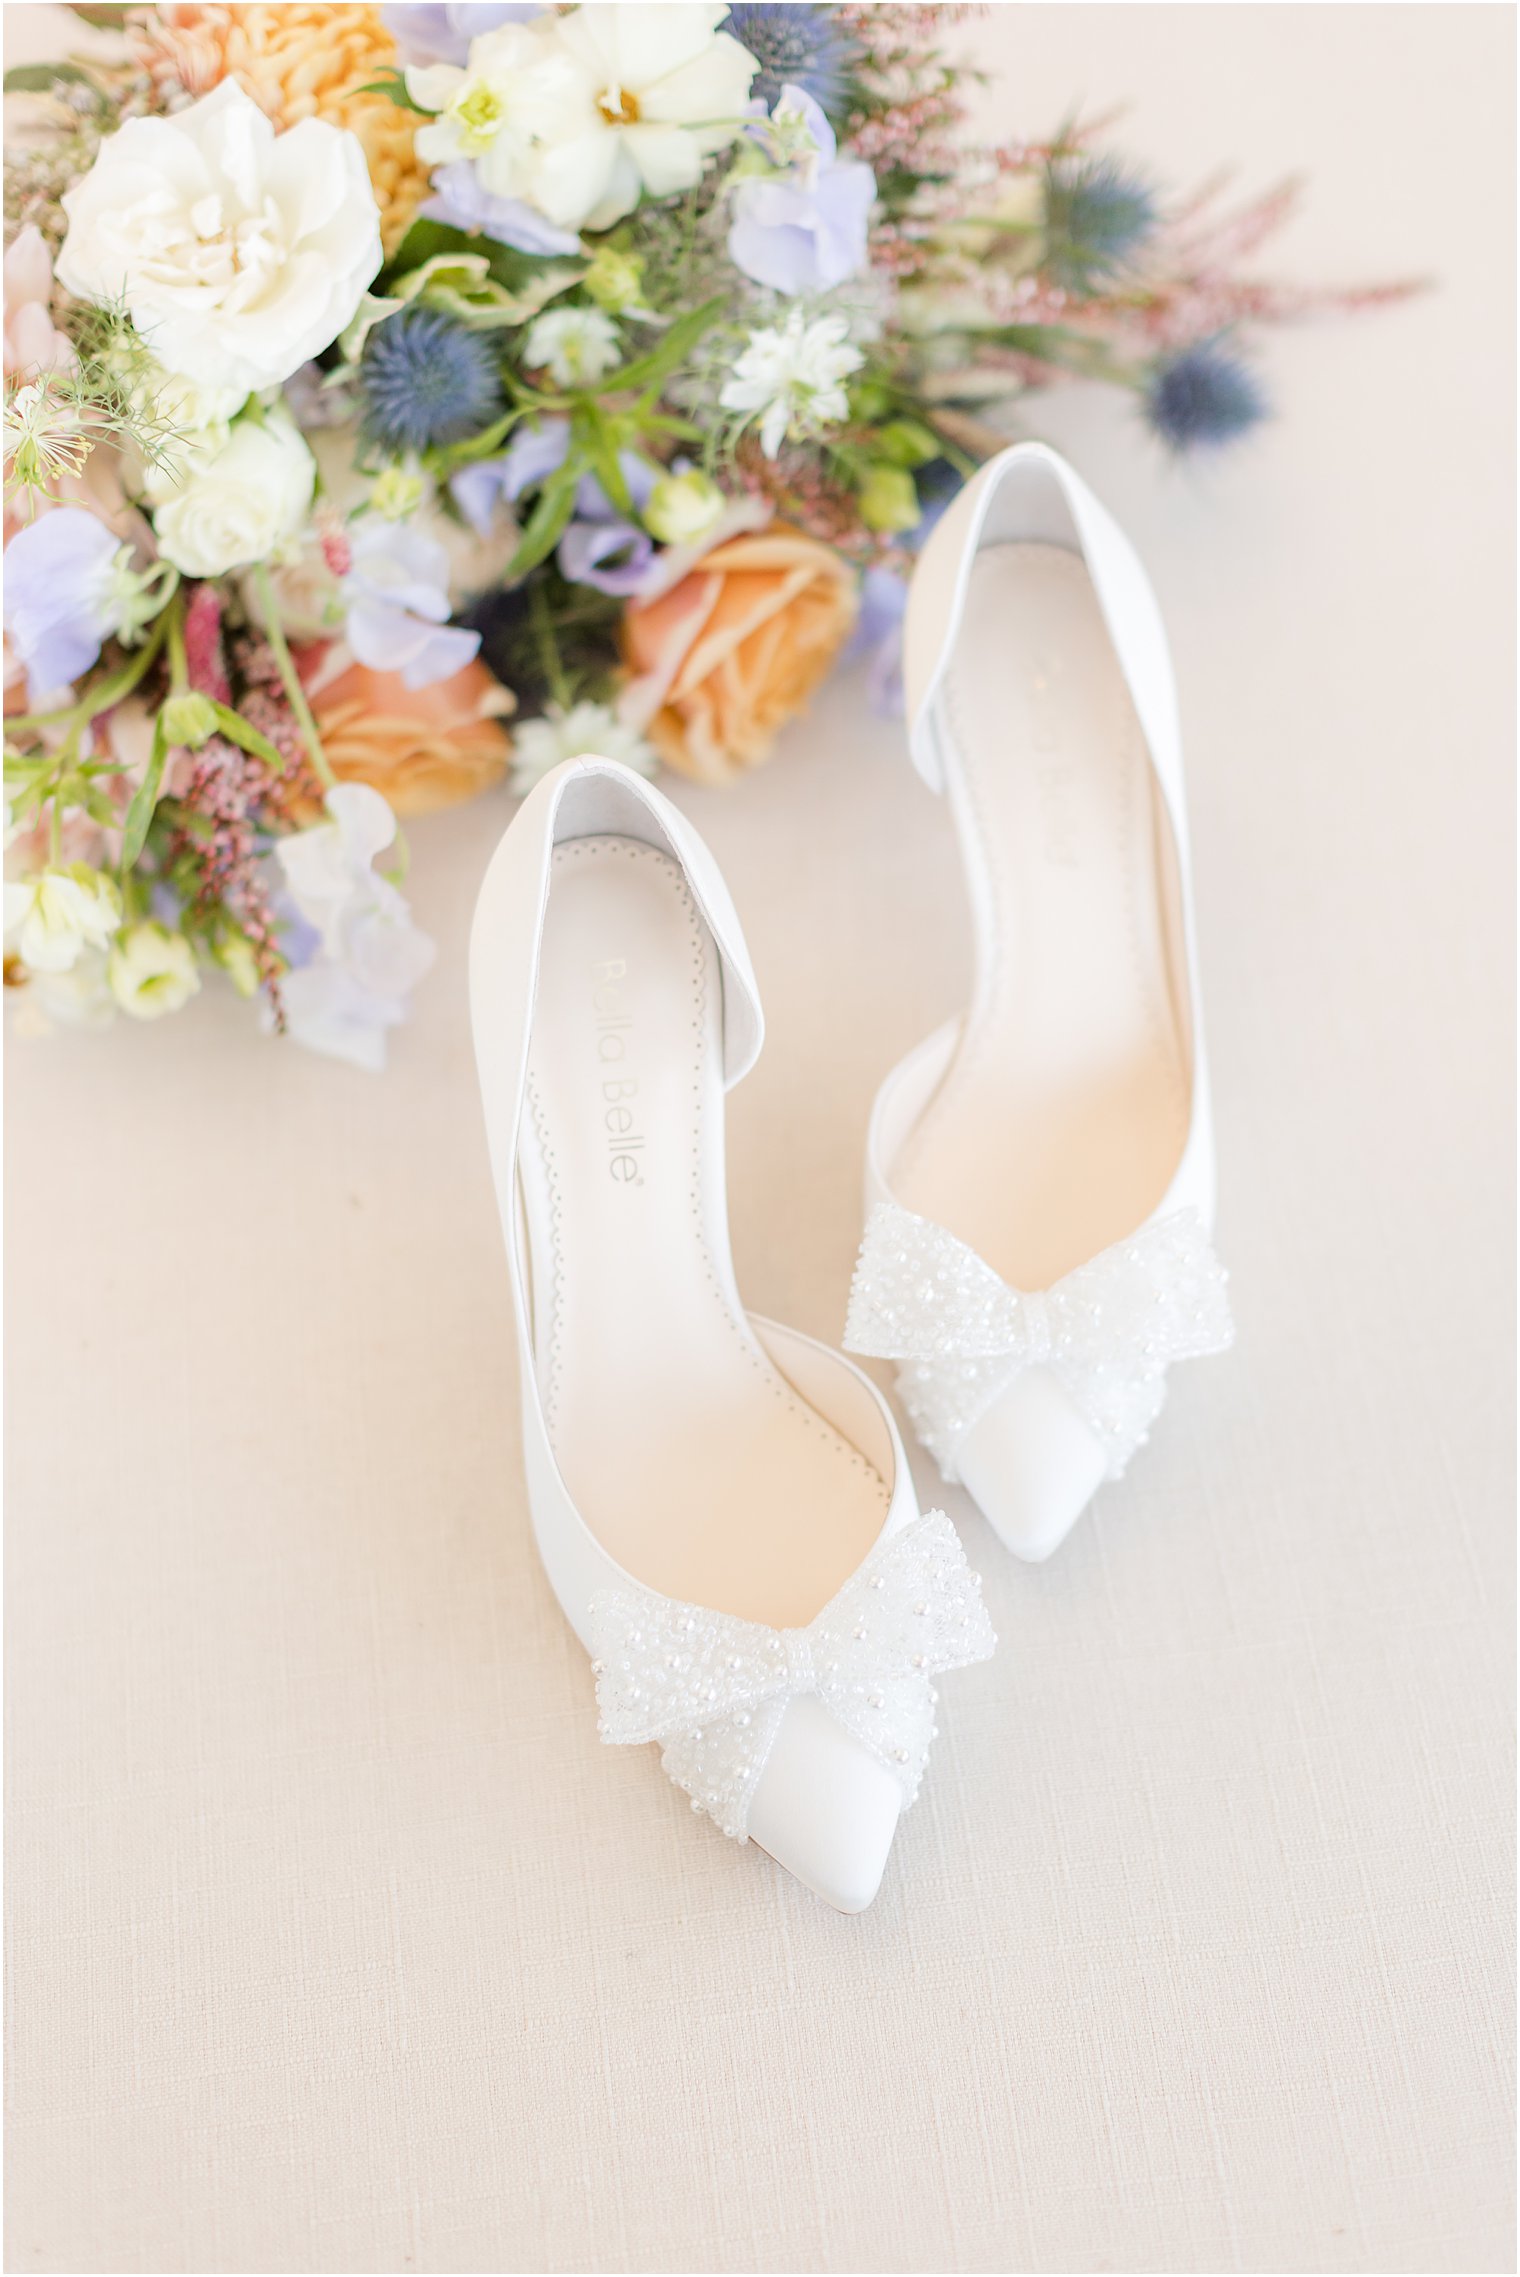 bride's white shoes with bows for spring wedding day